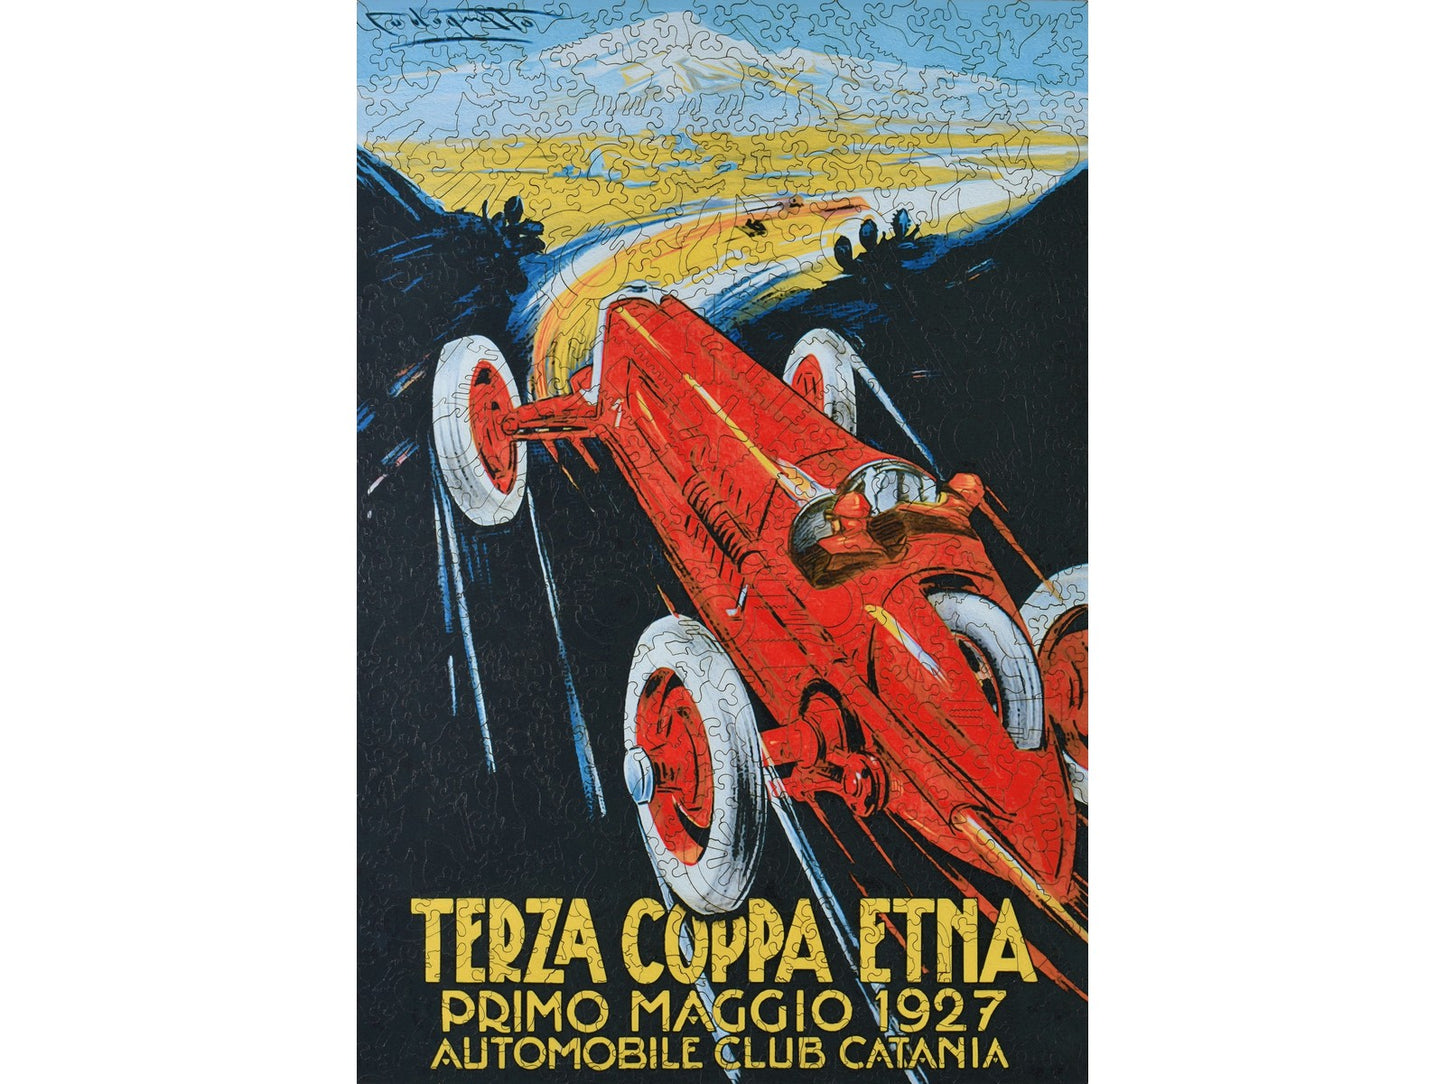 The front of the puzzle, Terza Coppa Etna, showing a racecar driving.